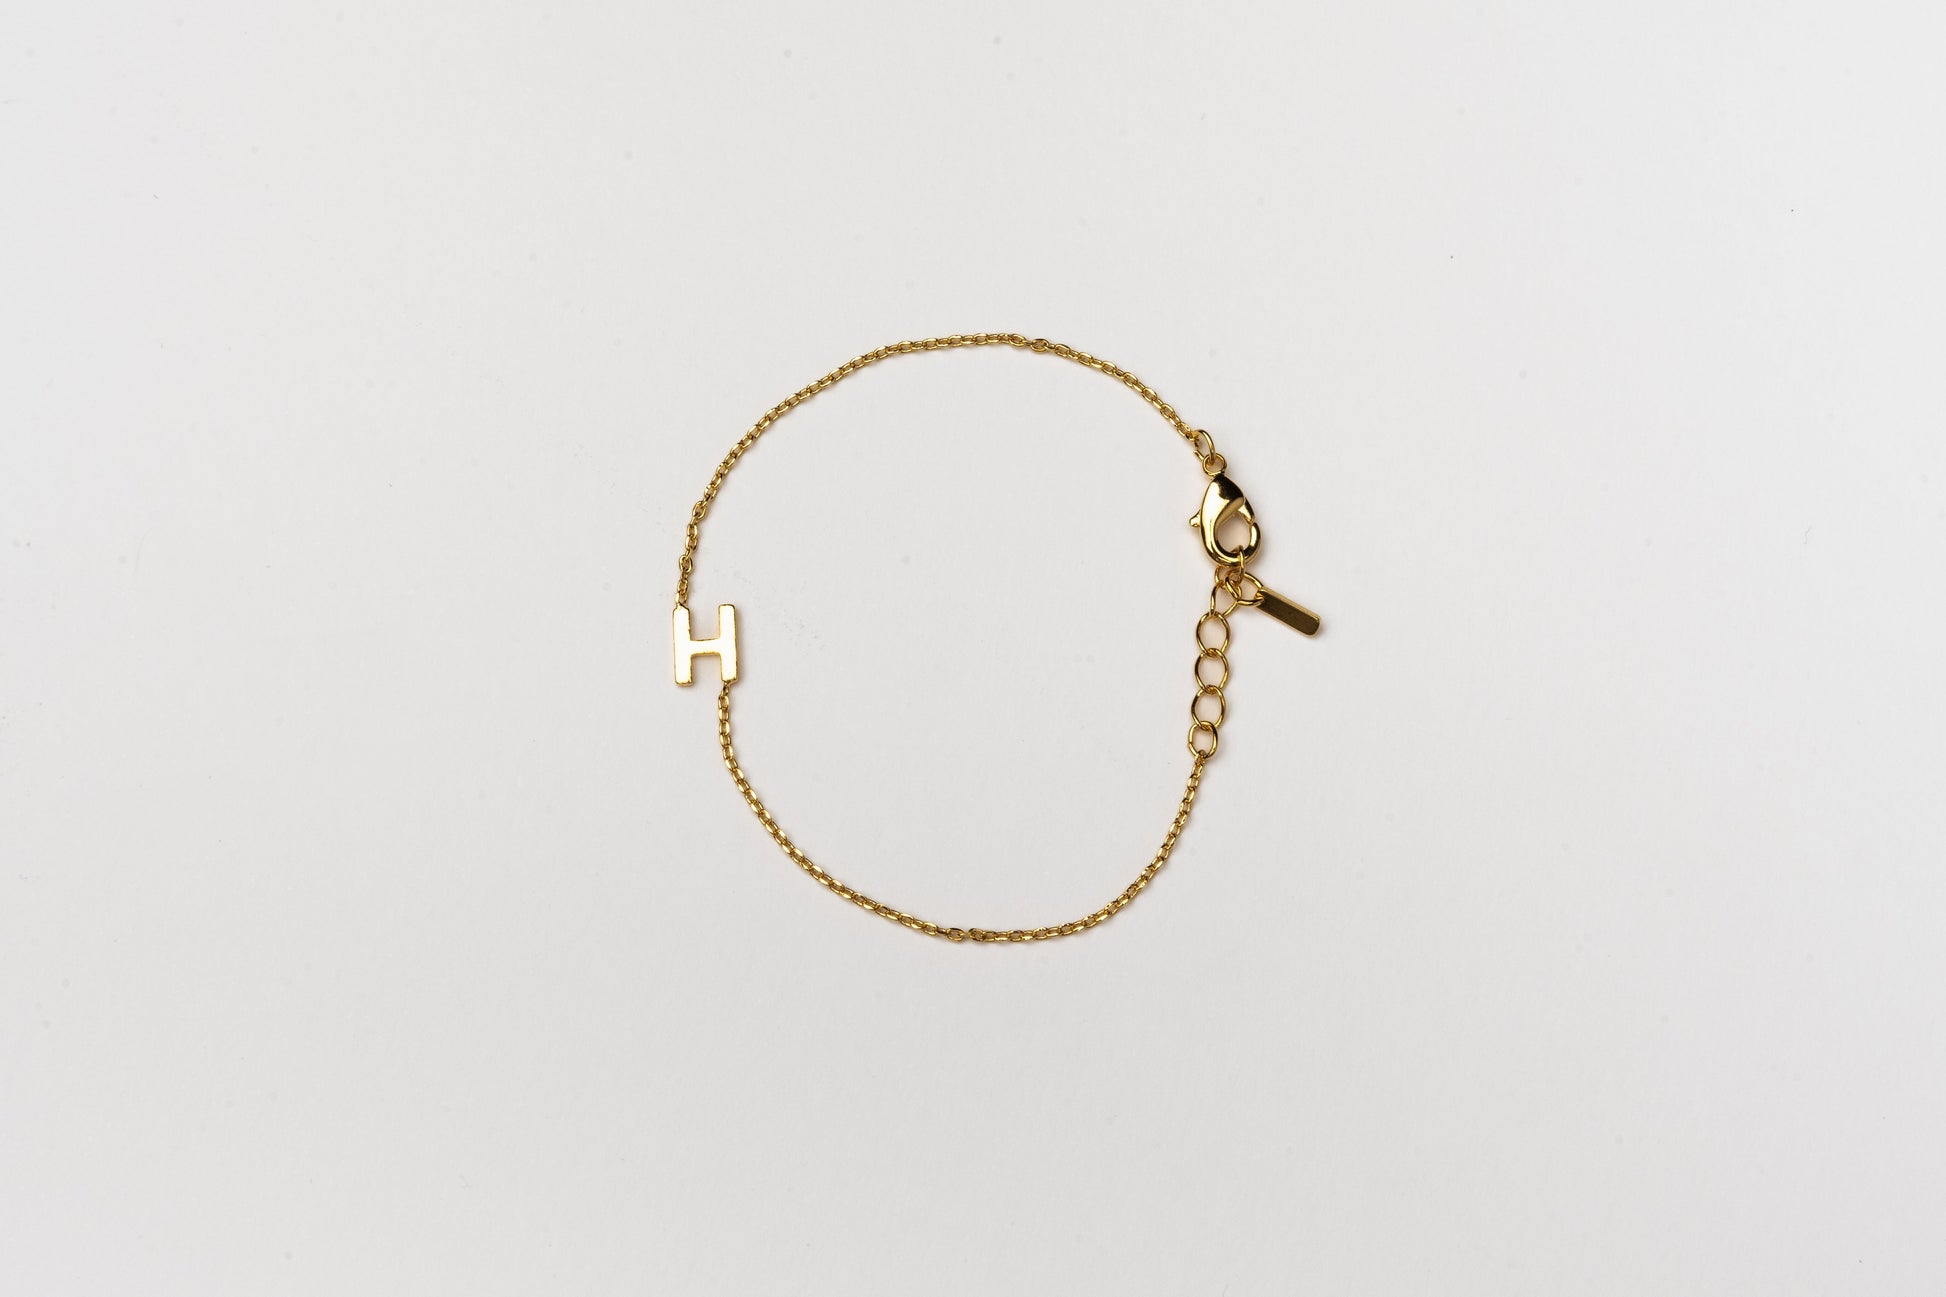 Cove Kid's Initial Bracelet KID'S BRACELET Cove Accessories 18k Gold Plated 0-6 Month/3.74" + 1/4" ext H